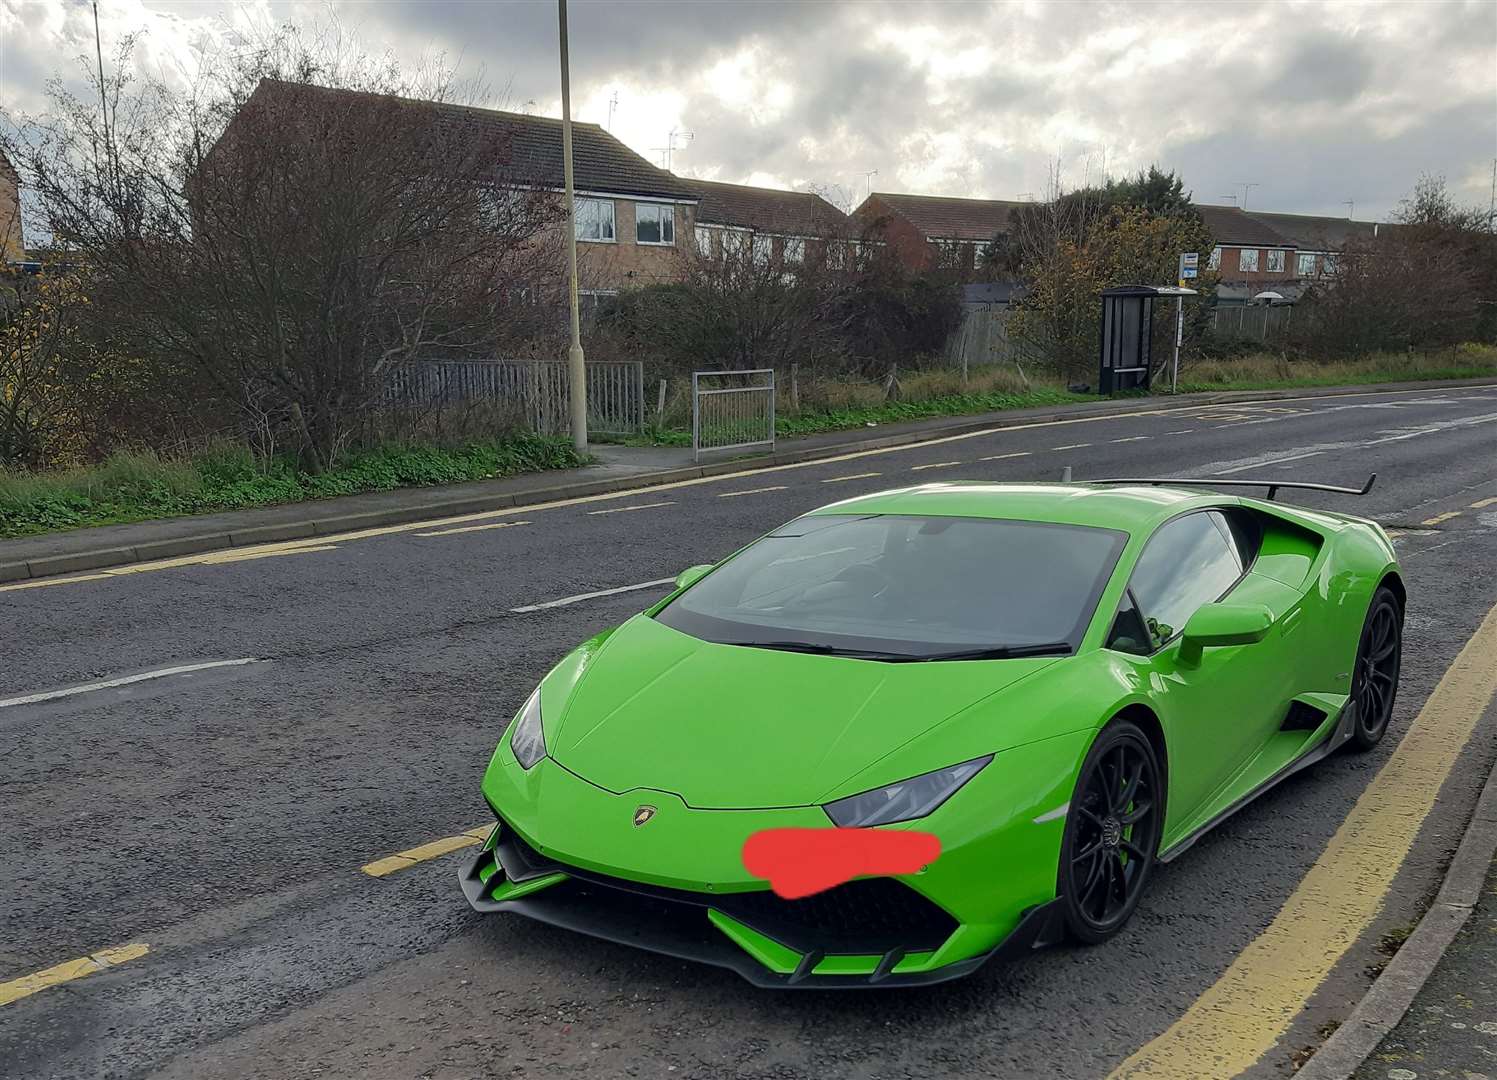 Lamborghini stopped by Kent Police in Herne Bay today. Picture: @kentpolicecbury / Twitter